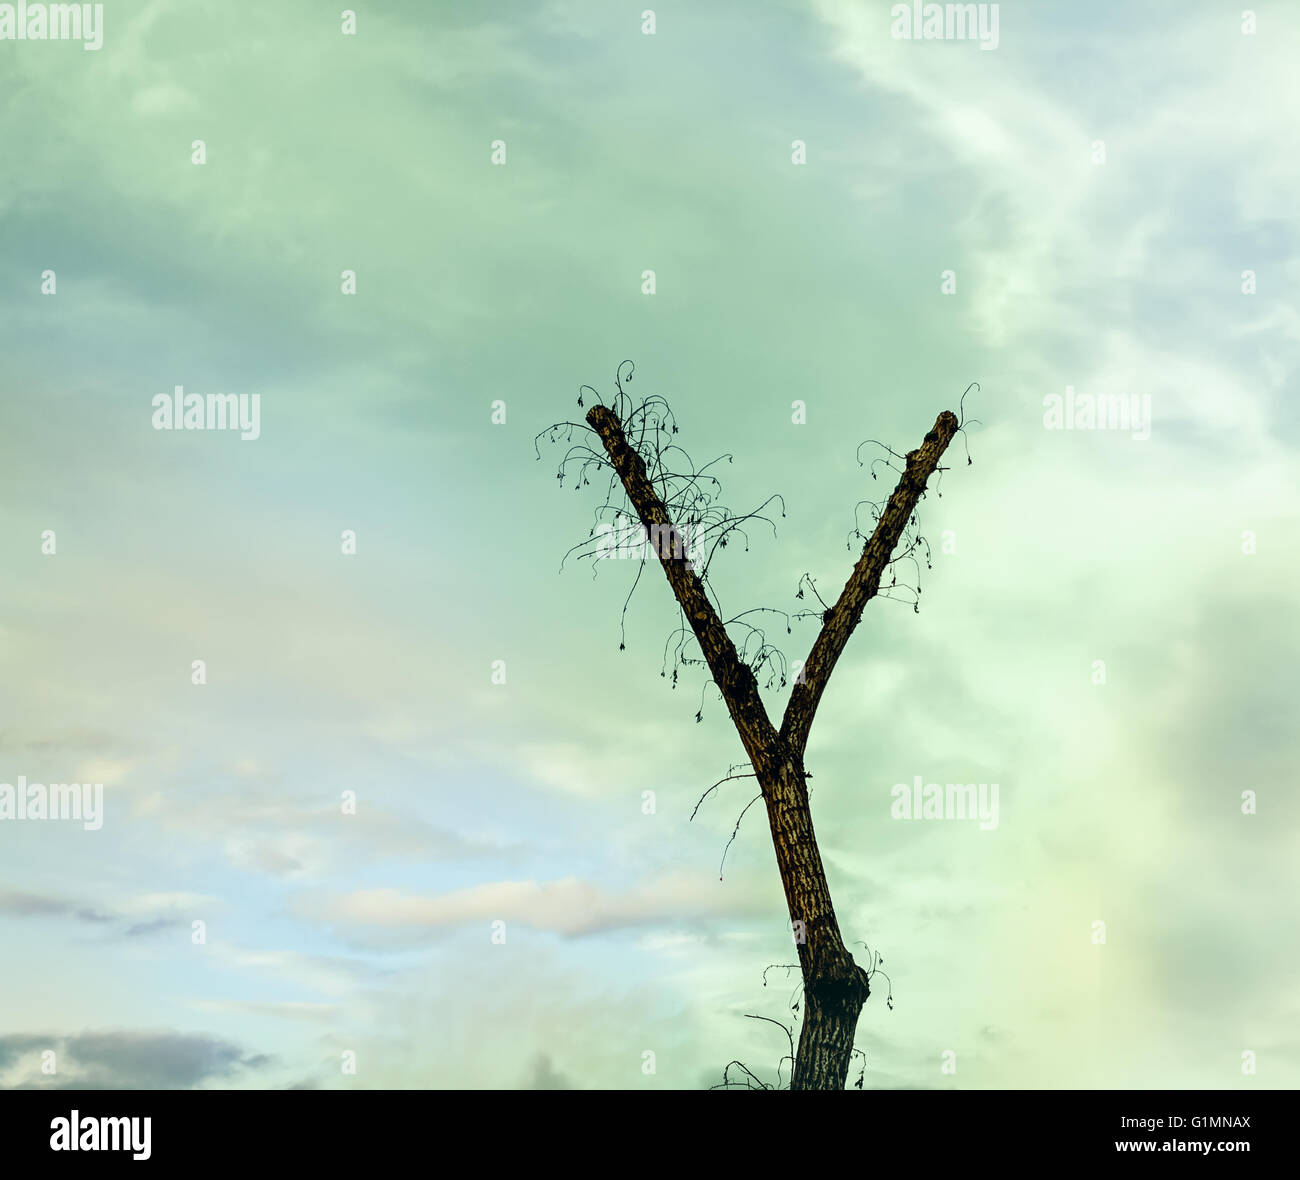 High tree in shape of y at blue and green sky background Stock Photo